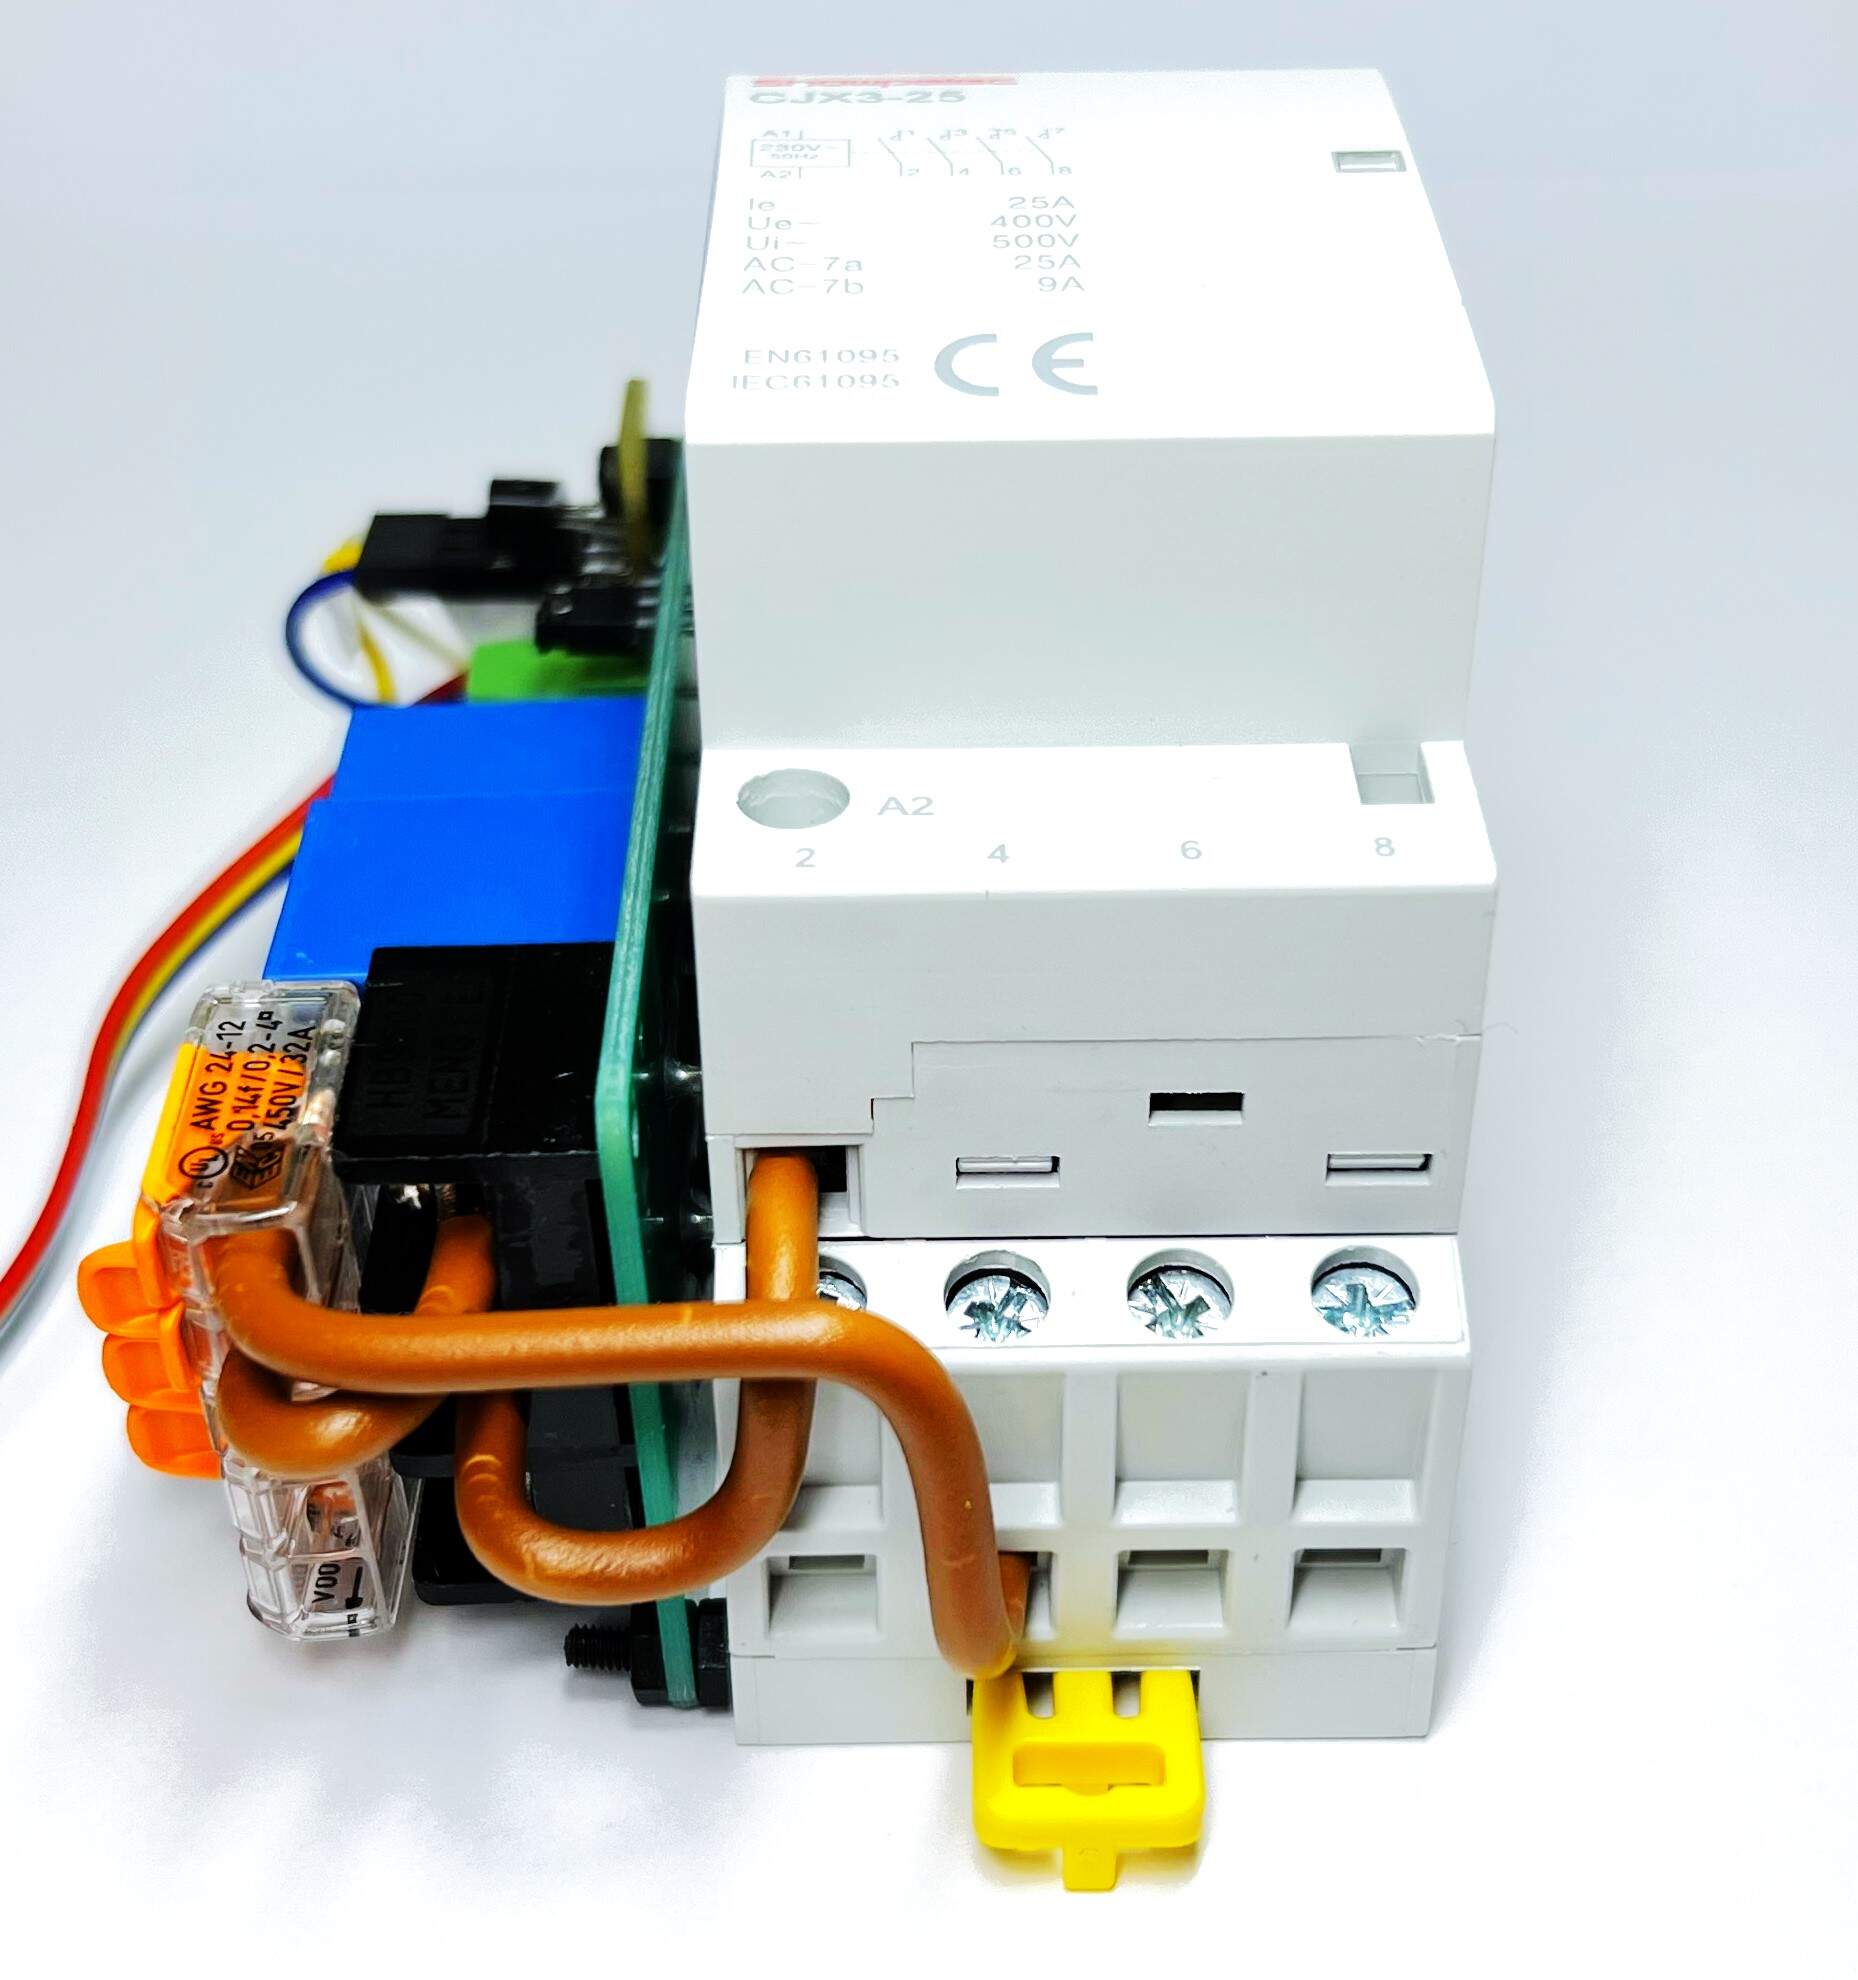 Contator, relay and Wago connected